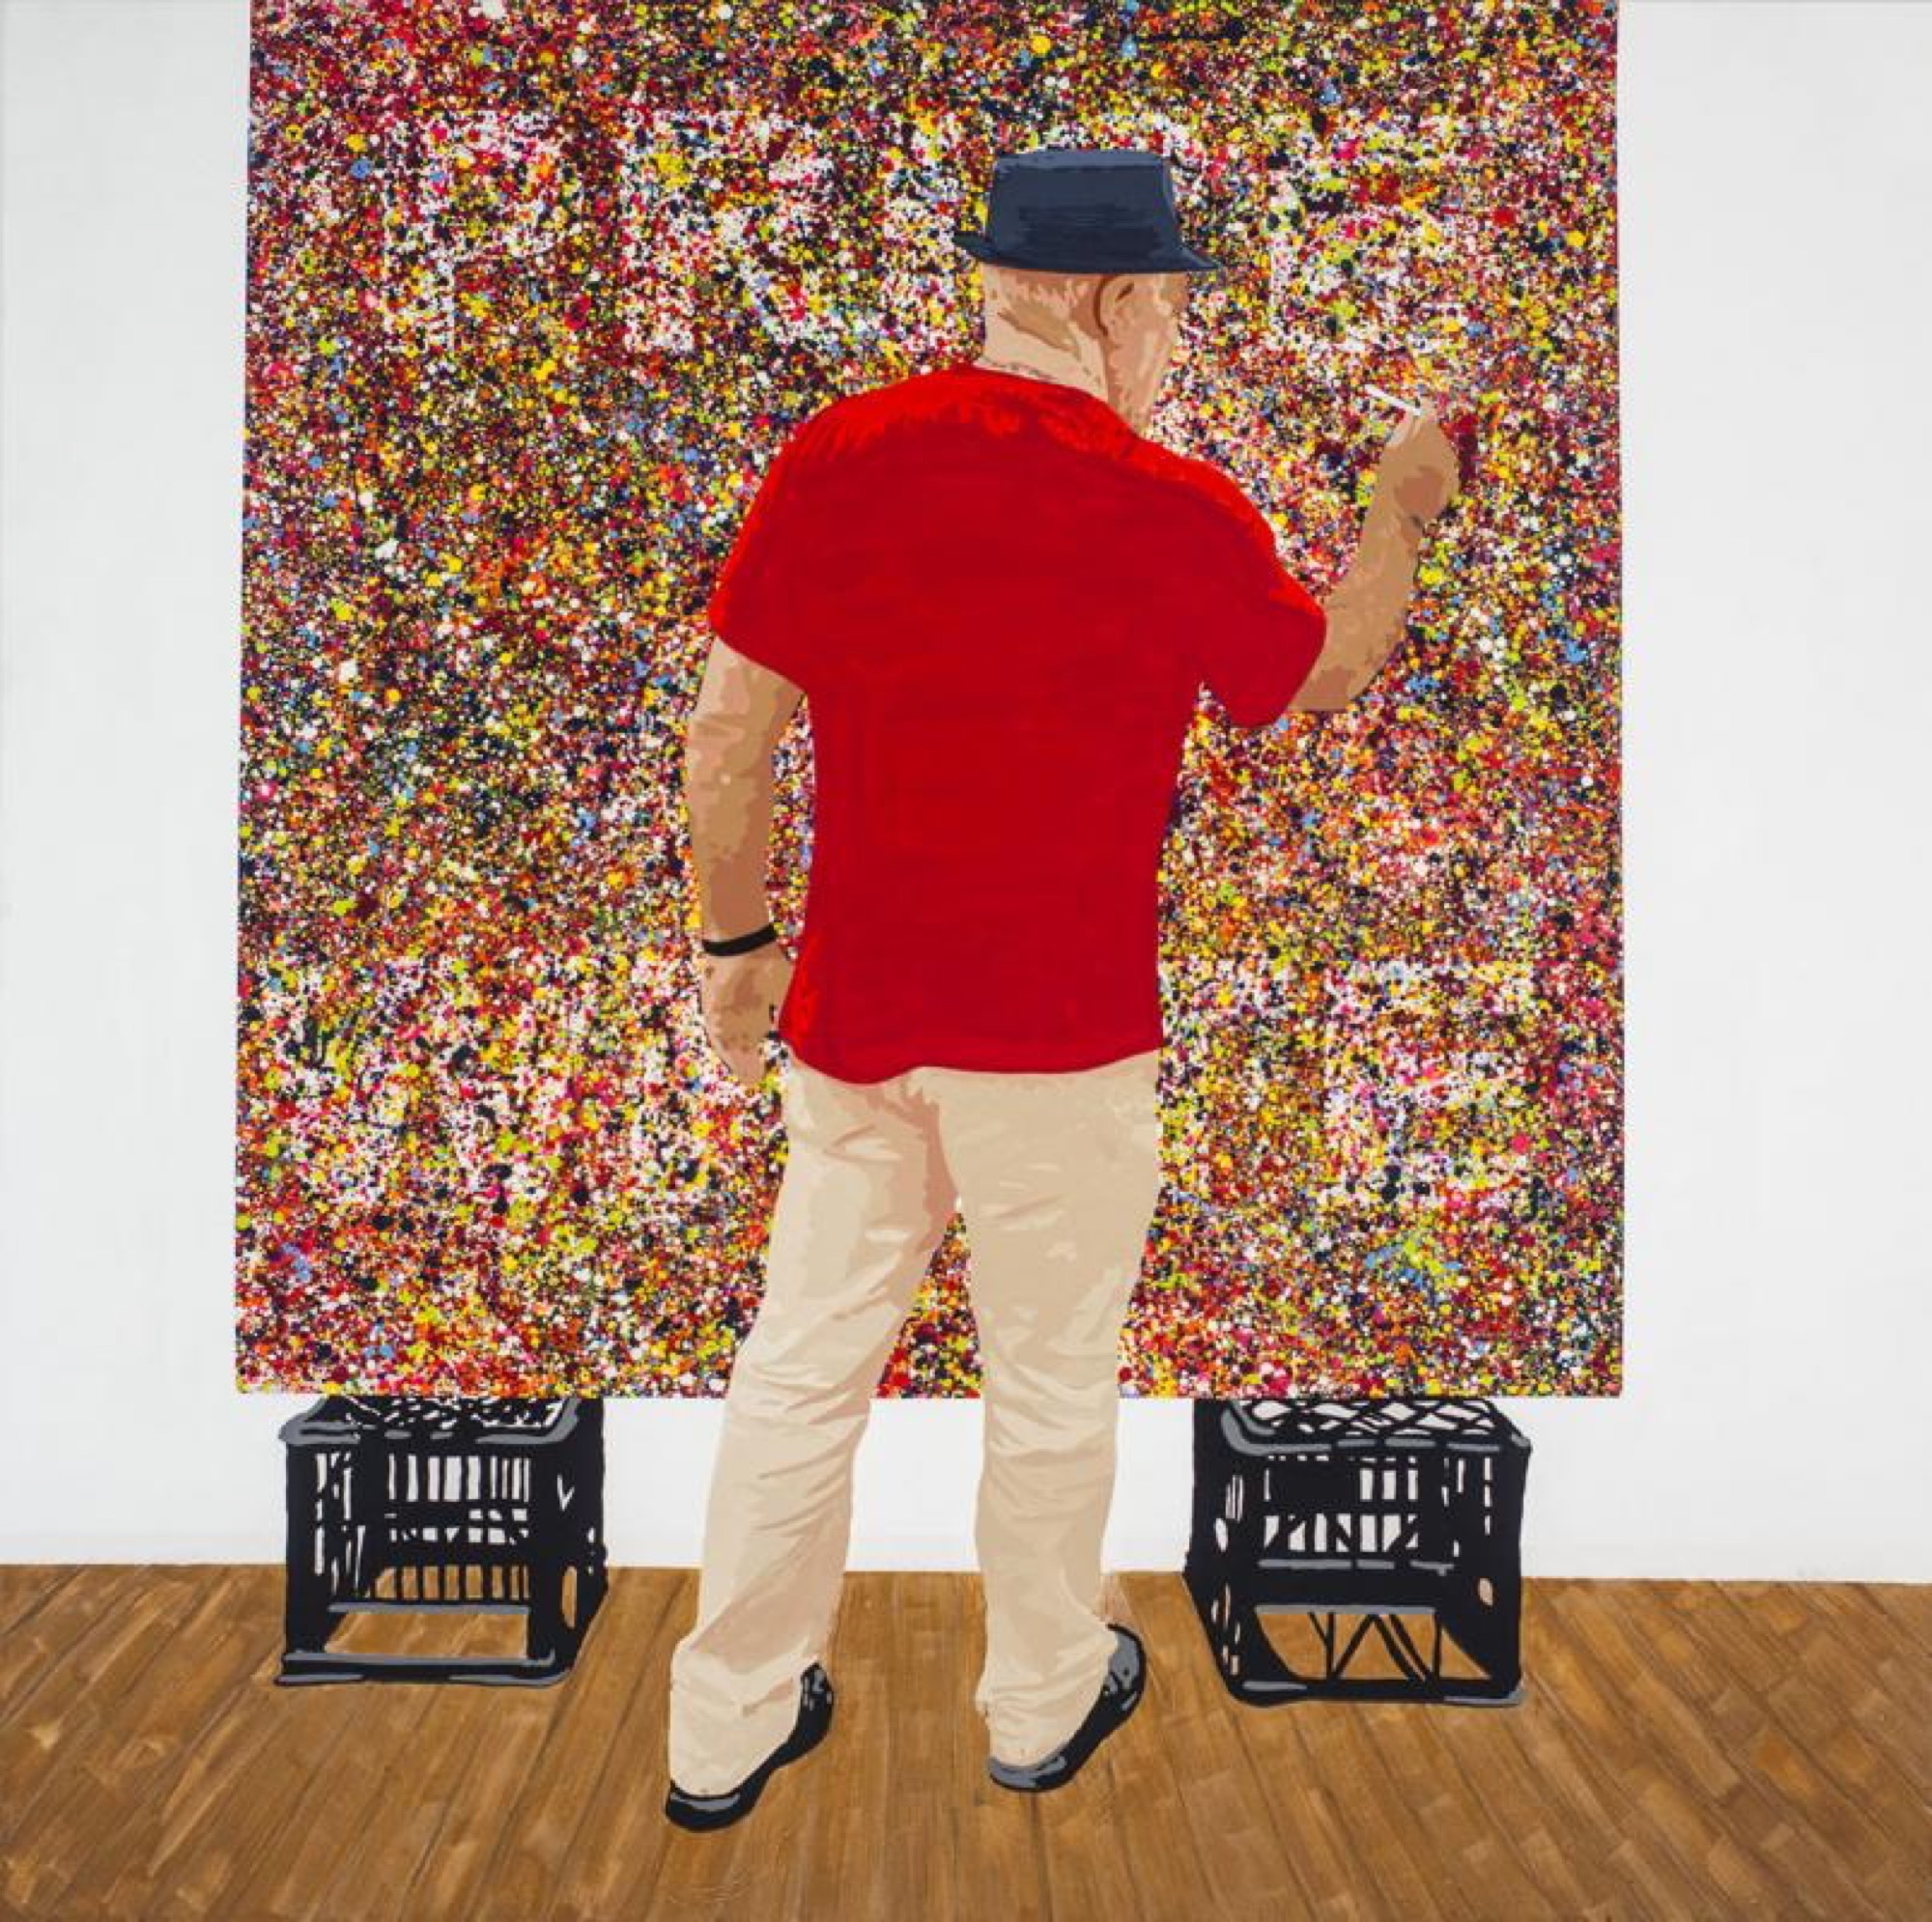 Richard Bell, <em>Working for the Man,</em> 2017, Acrylic on canvas, 150 x 150 cm. Collection of Paul and Sue Taylor, Brisbane.